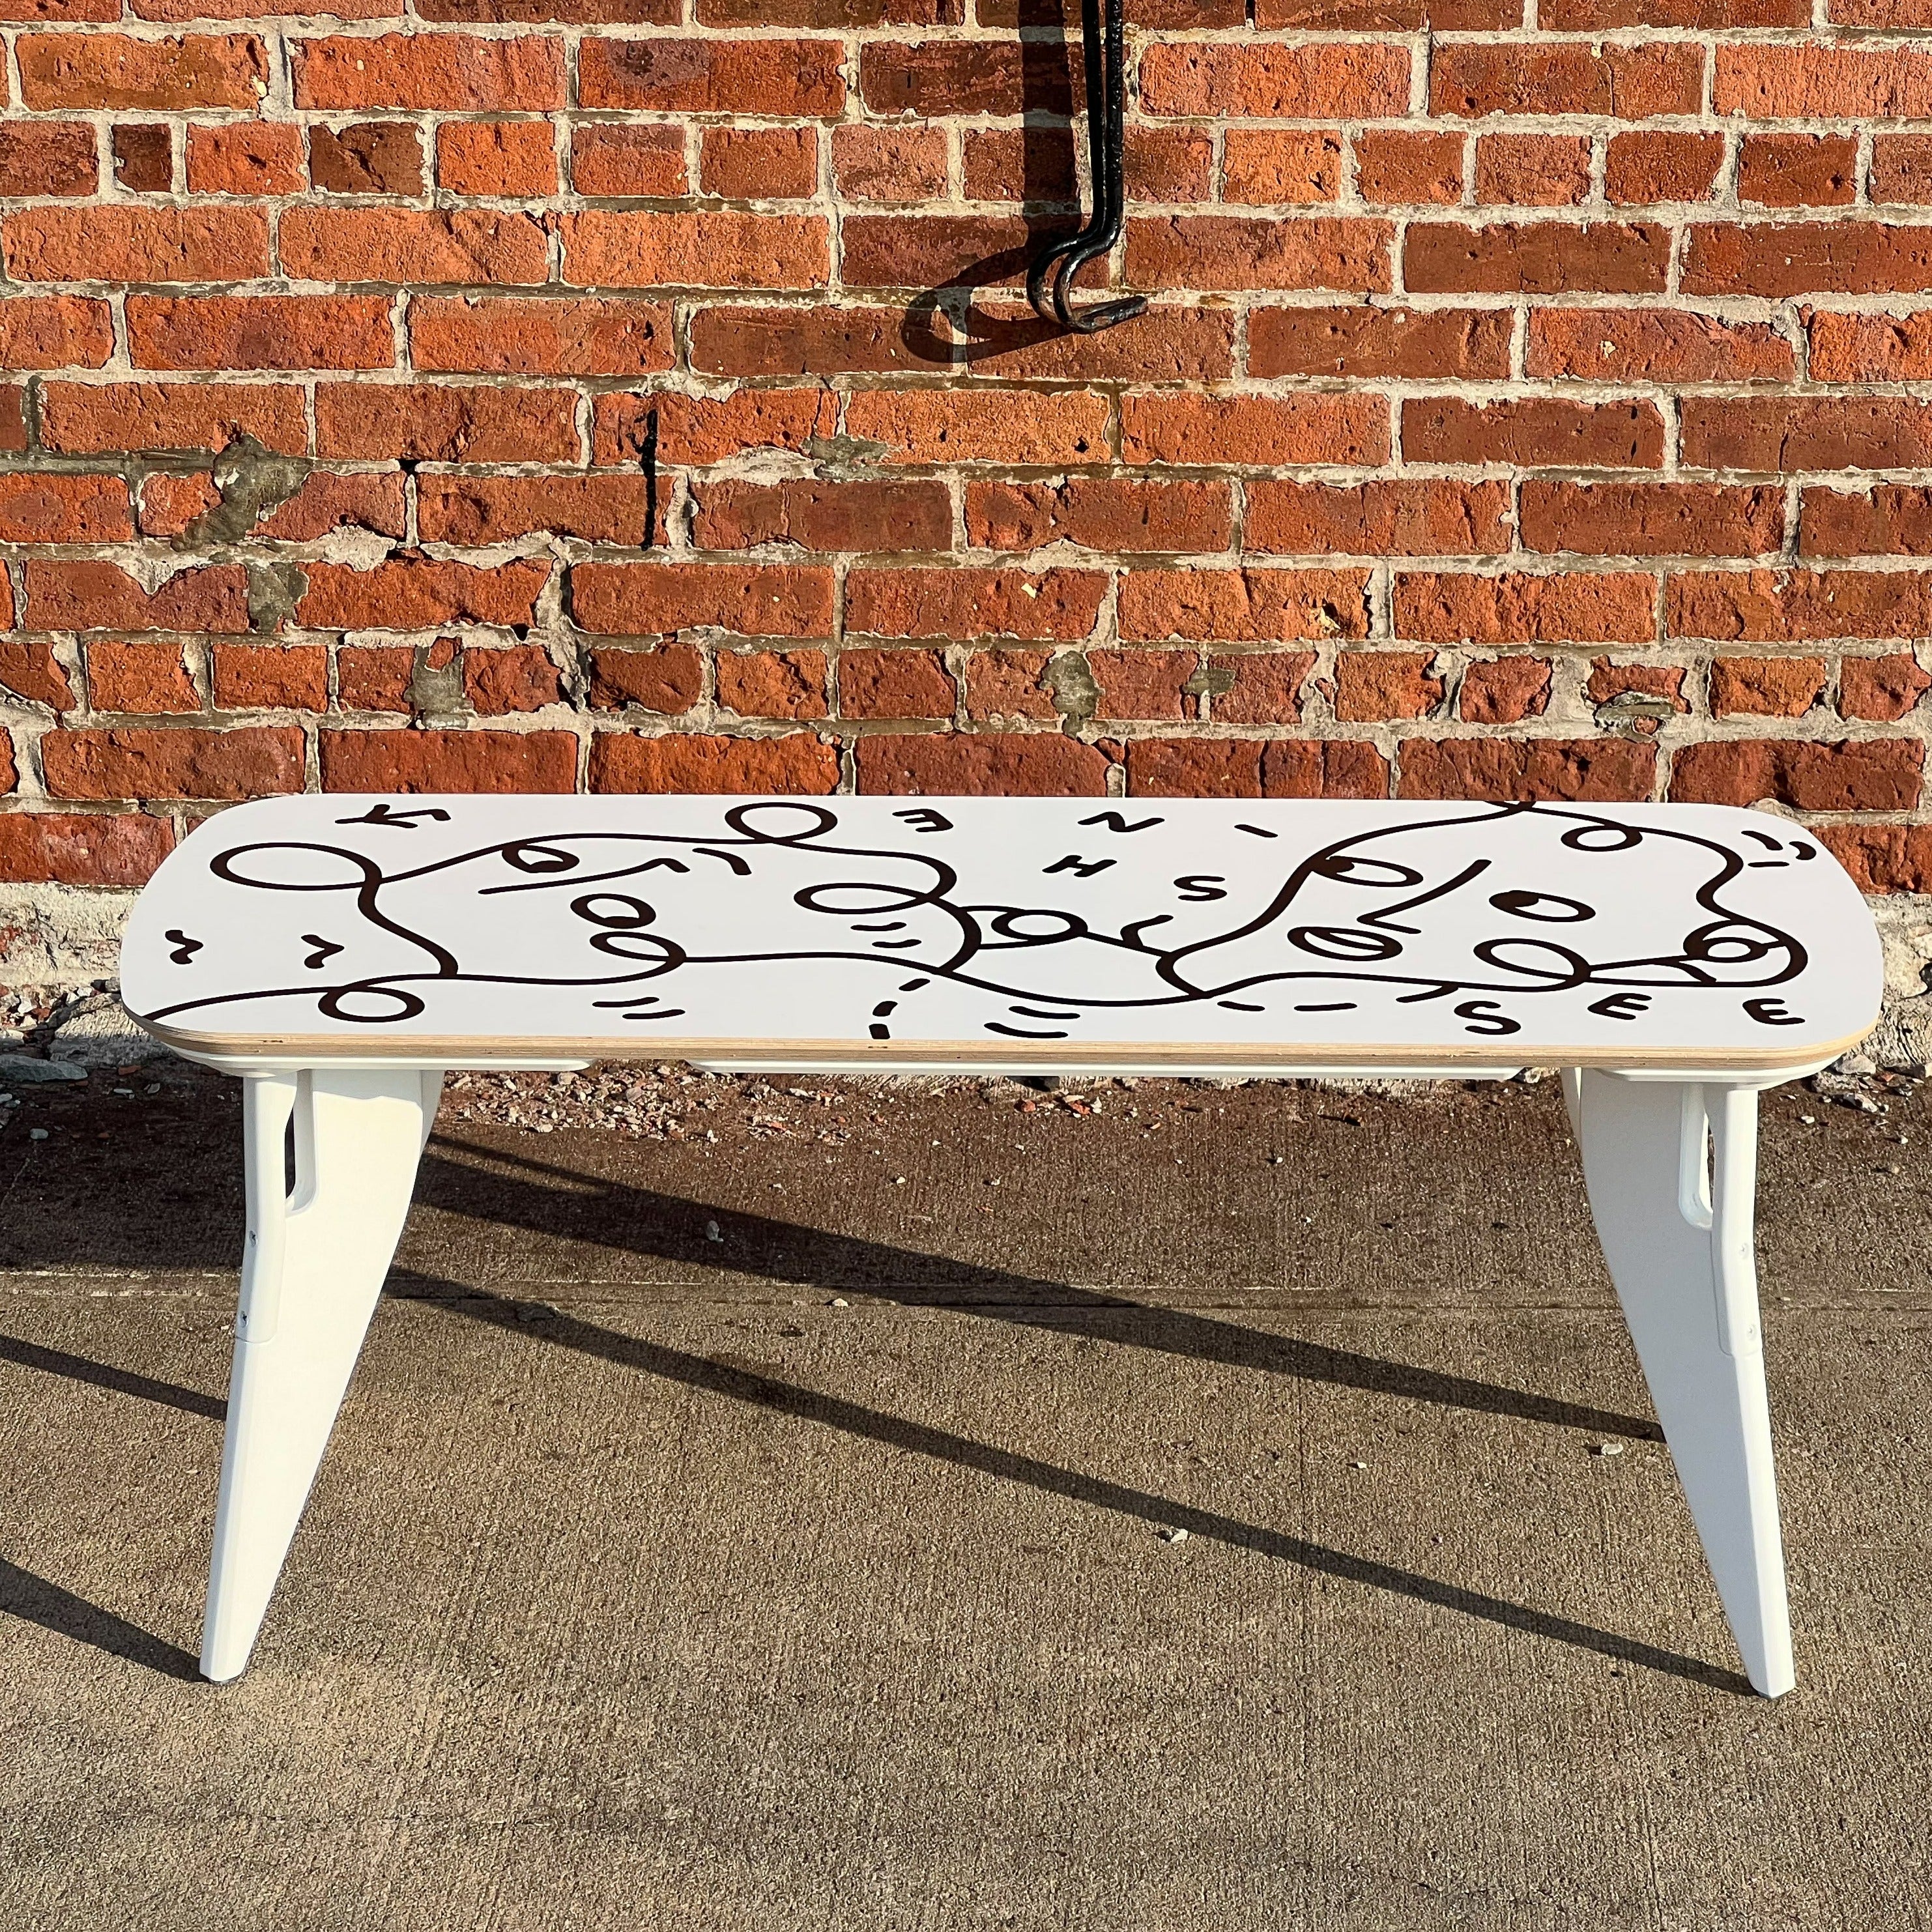 Bench - Shantell Martin limited-edition